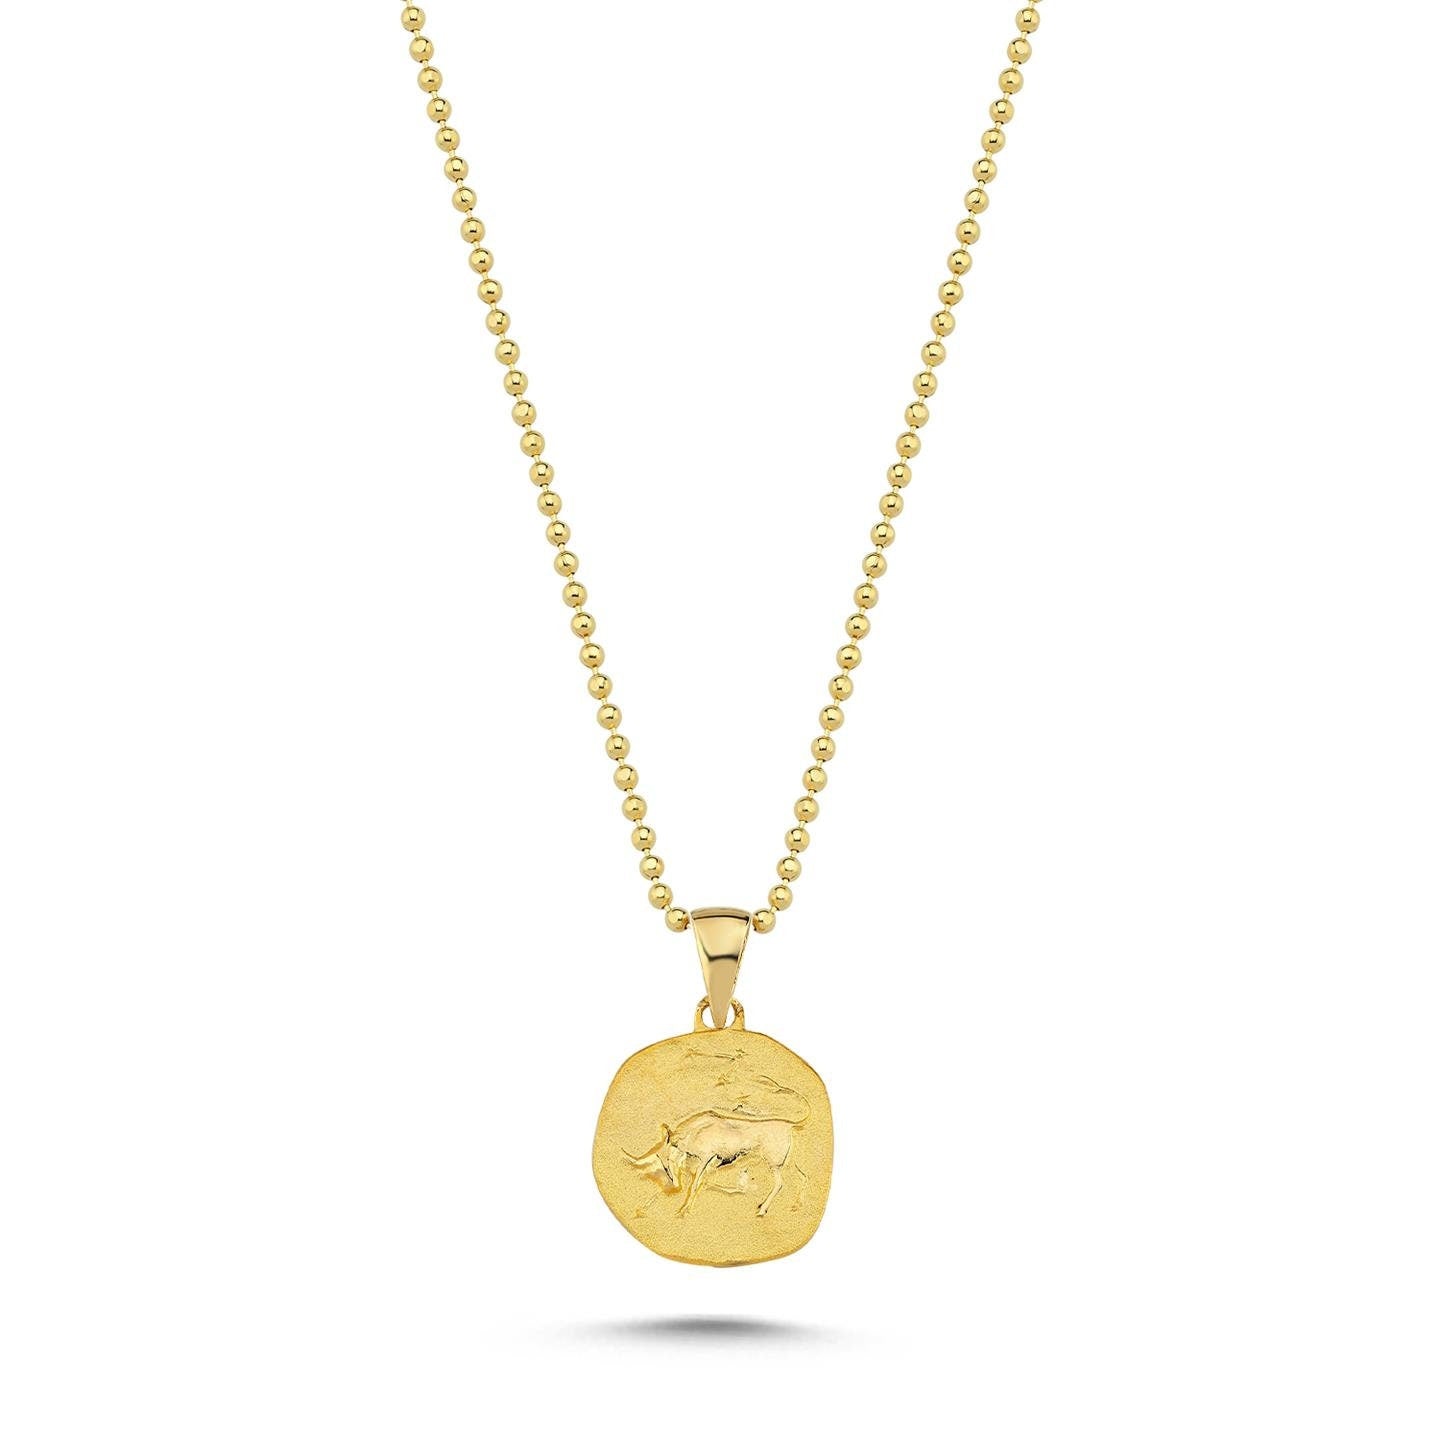 14K Gold Zodiac Taurus Necklace - Elegant Taurus Necklace - Perfect Gift for Astrology Lovers